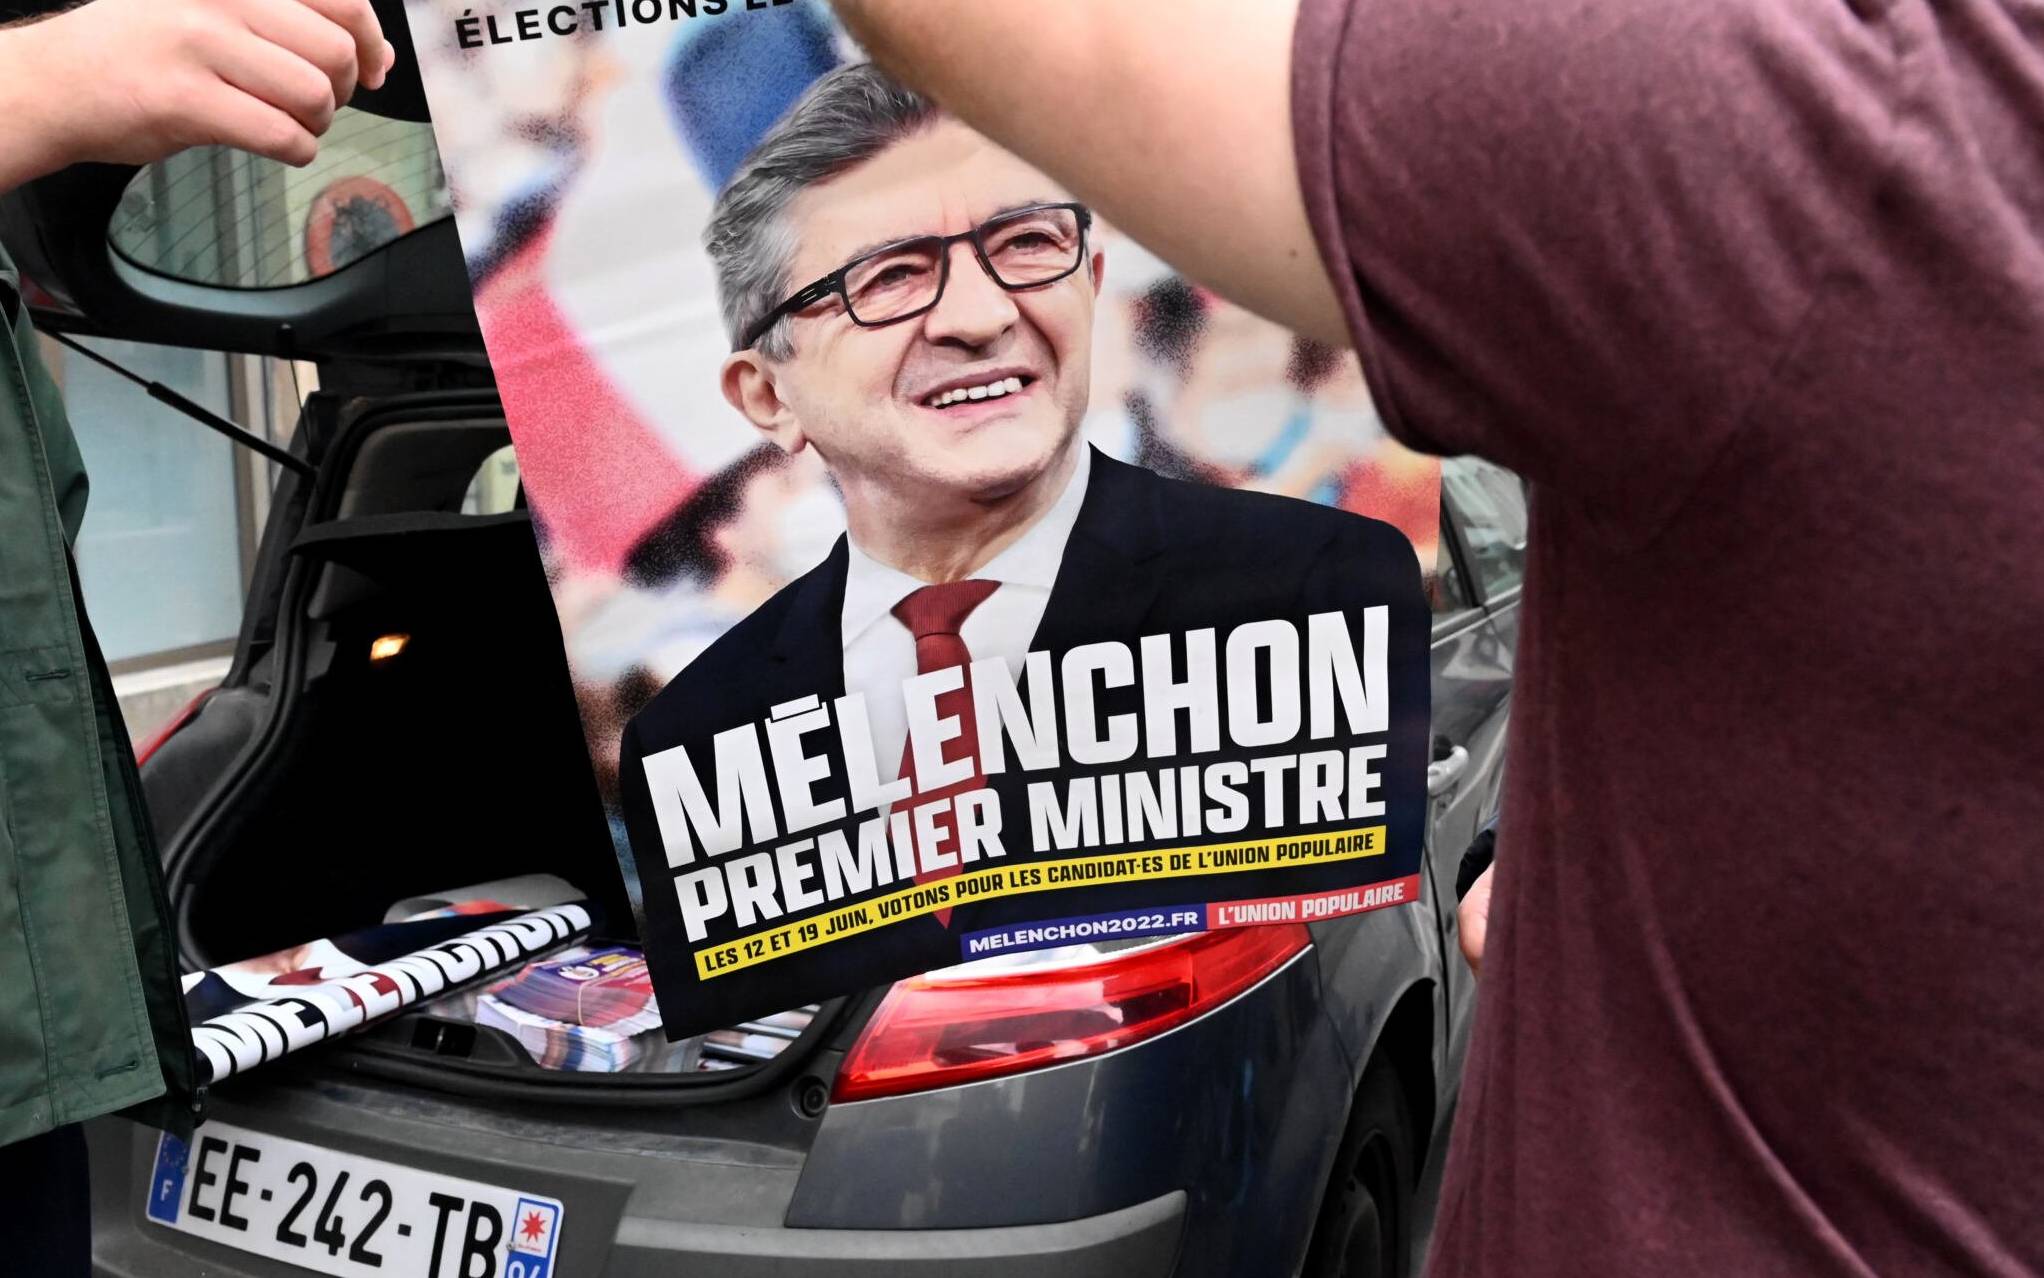 Militants of French leftist movement La France Insoumise (LFI) display a campaign poster reading in French "Melenchon, Prime Minister" outside LFI's headquarters in Paris on May 3, 2022, where discussions are underway on a broad alliance between the four main leftists parties for June parliamentary polls. (Photo by EMMANUEL DUNAND / AFP)